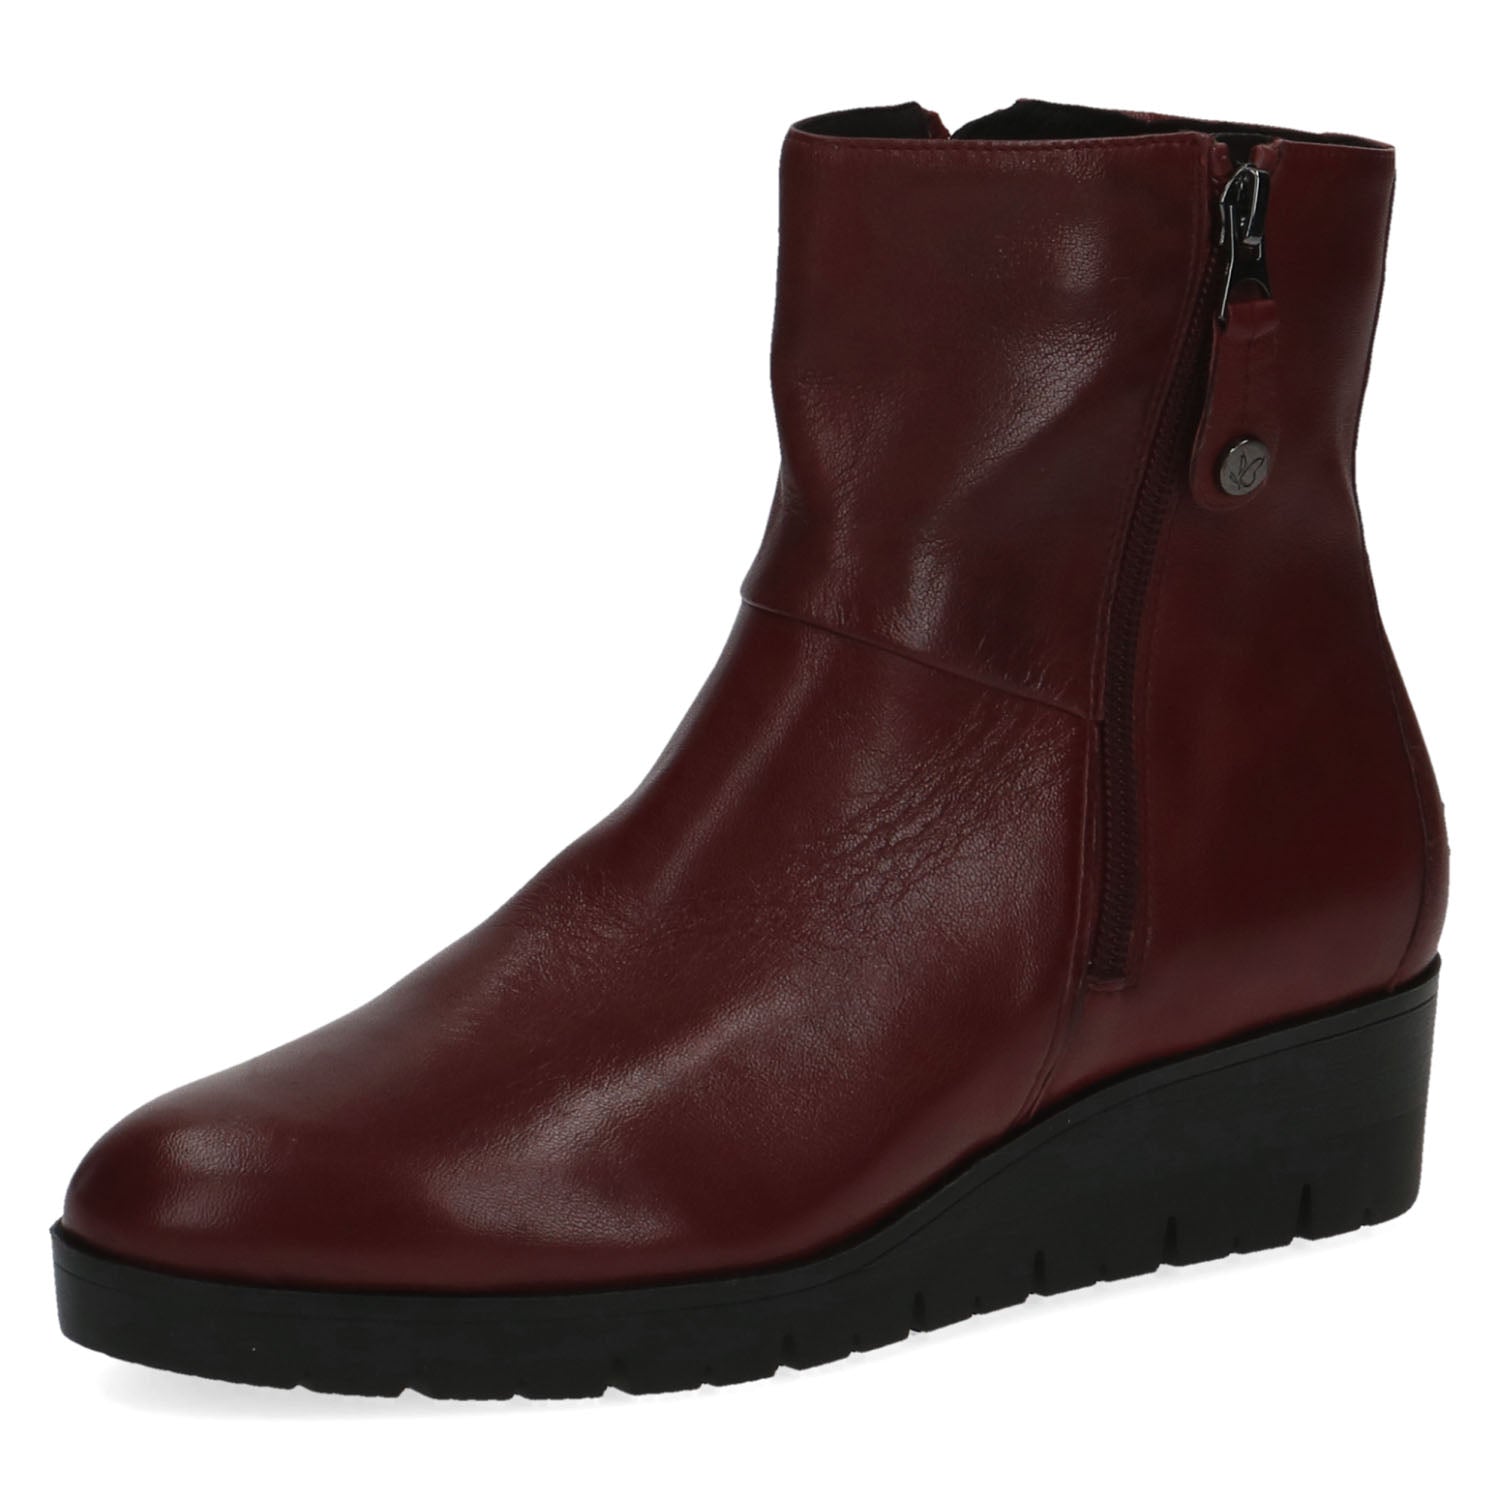 Angled shot of the Wine Stretch Fit Wedge Ankle Boot, showcasing the dual zipper feature.